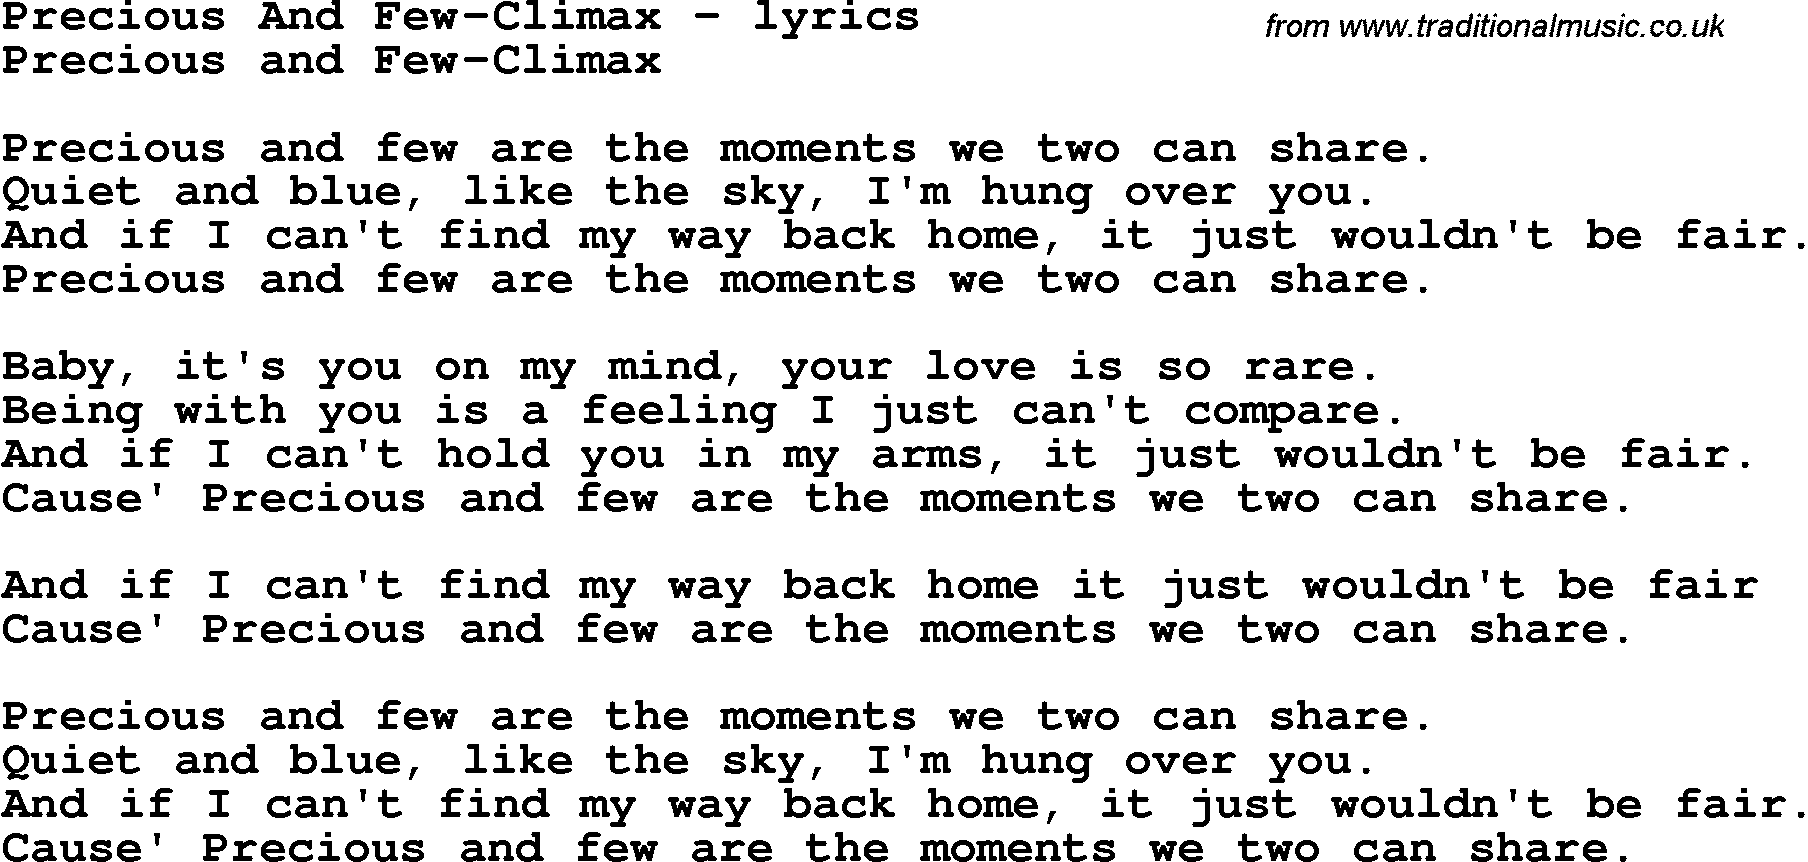 Love Song Lyrics for: Precious And Few-Climax